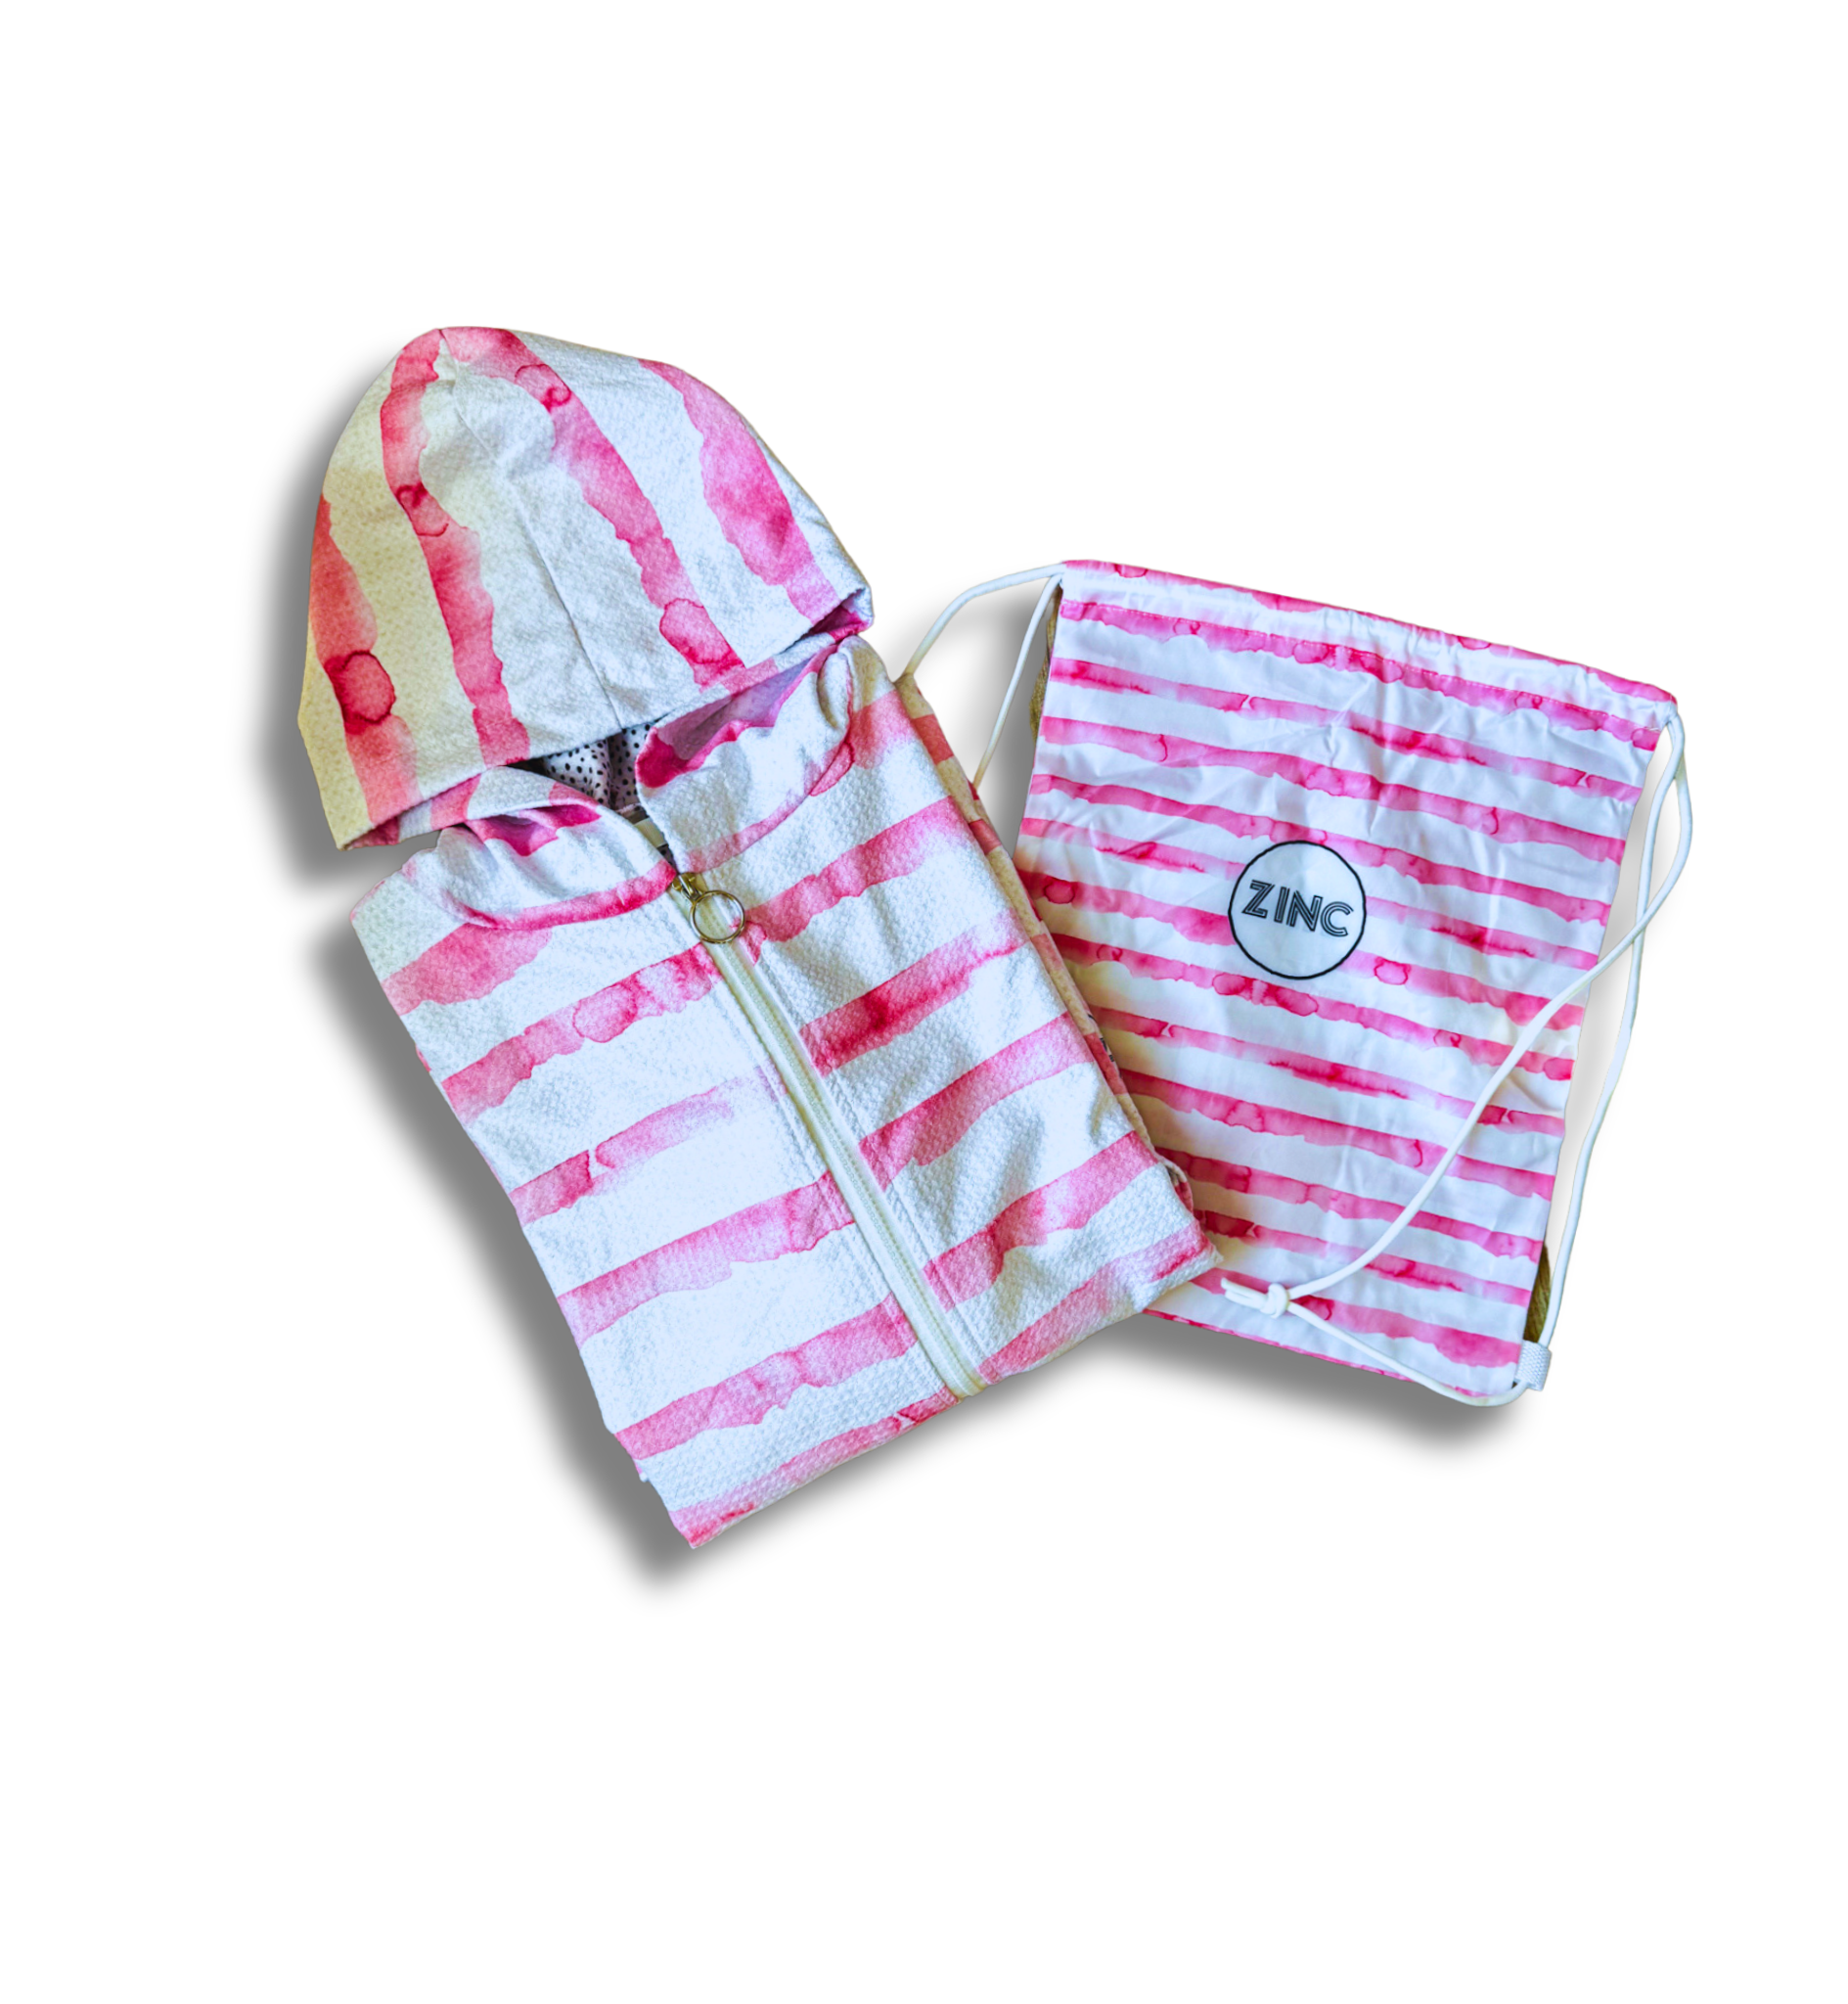 Small ZIP UP Hooded Towel - French Beach Pink